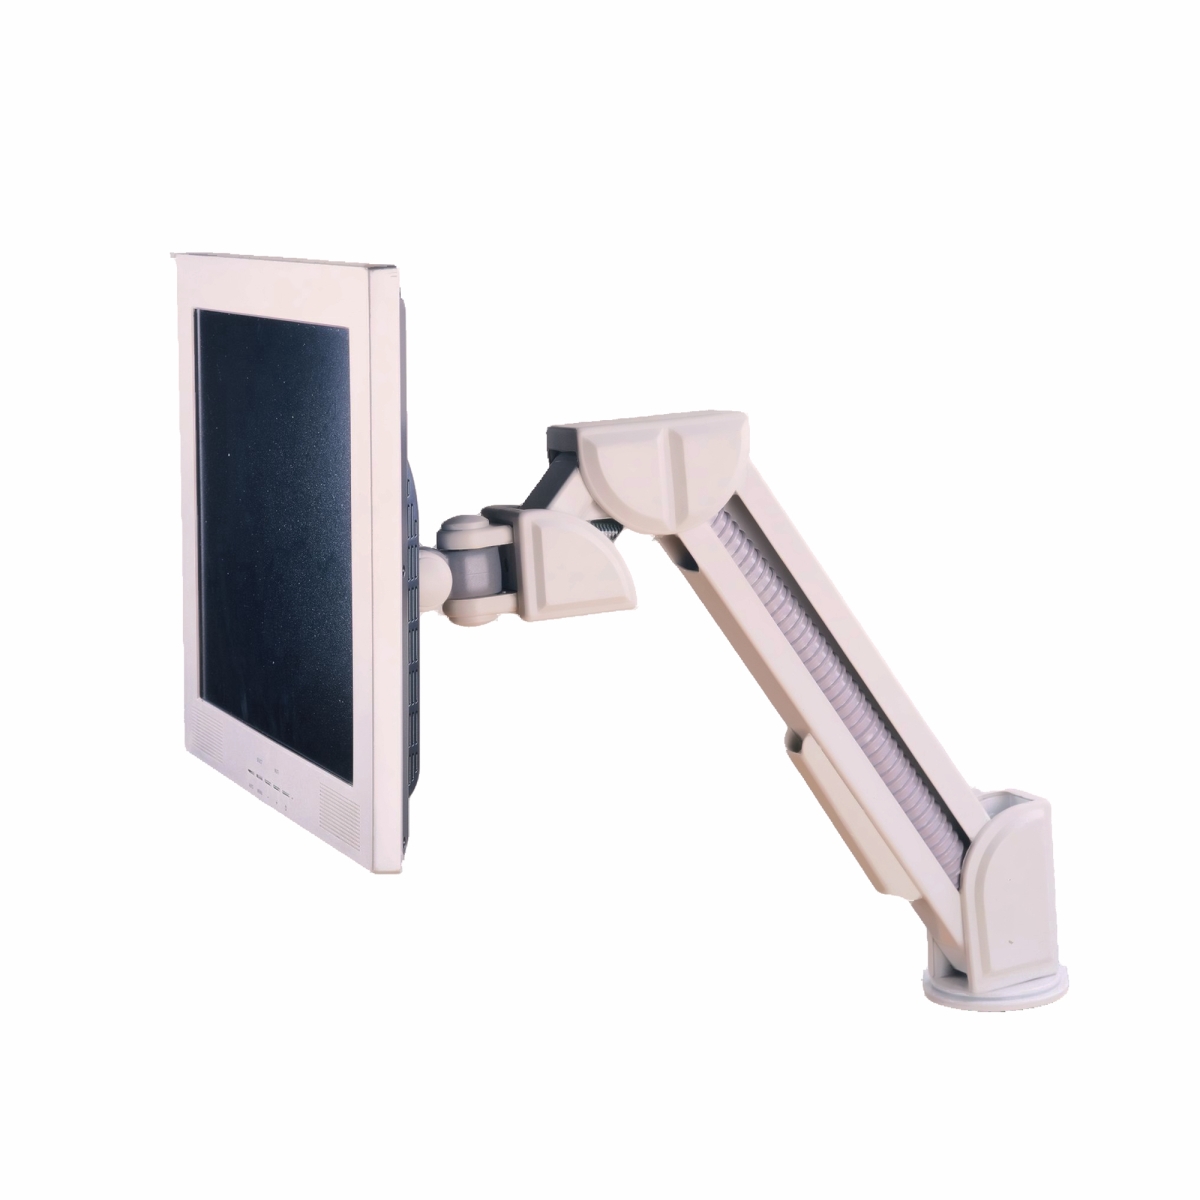 Tyger Claw LCD6508 TygerClaw Desk Mount for 14-17 in. Monitor